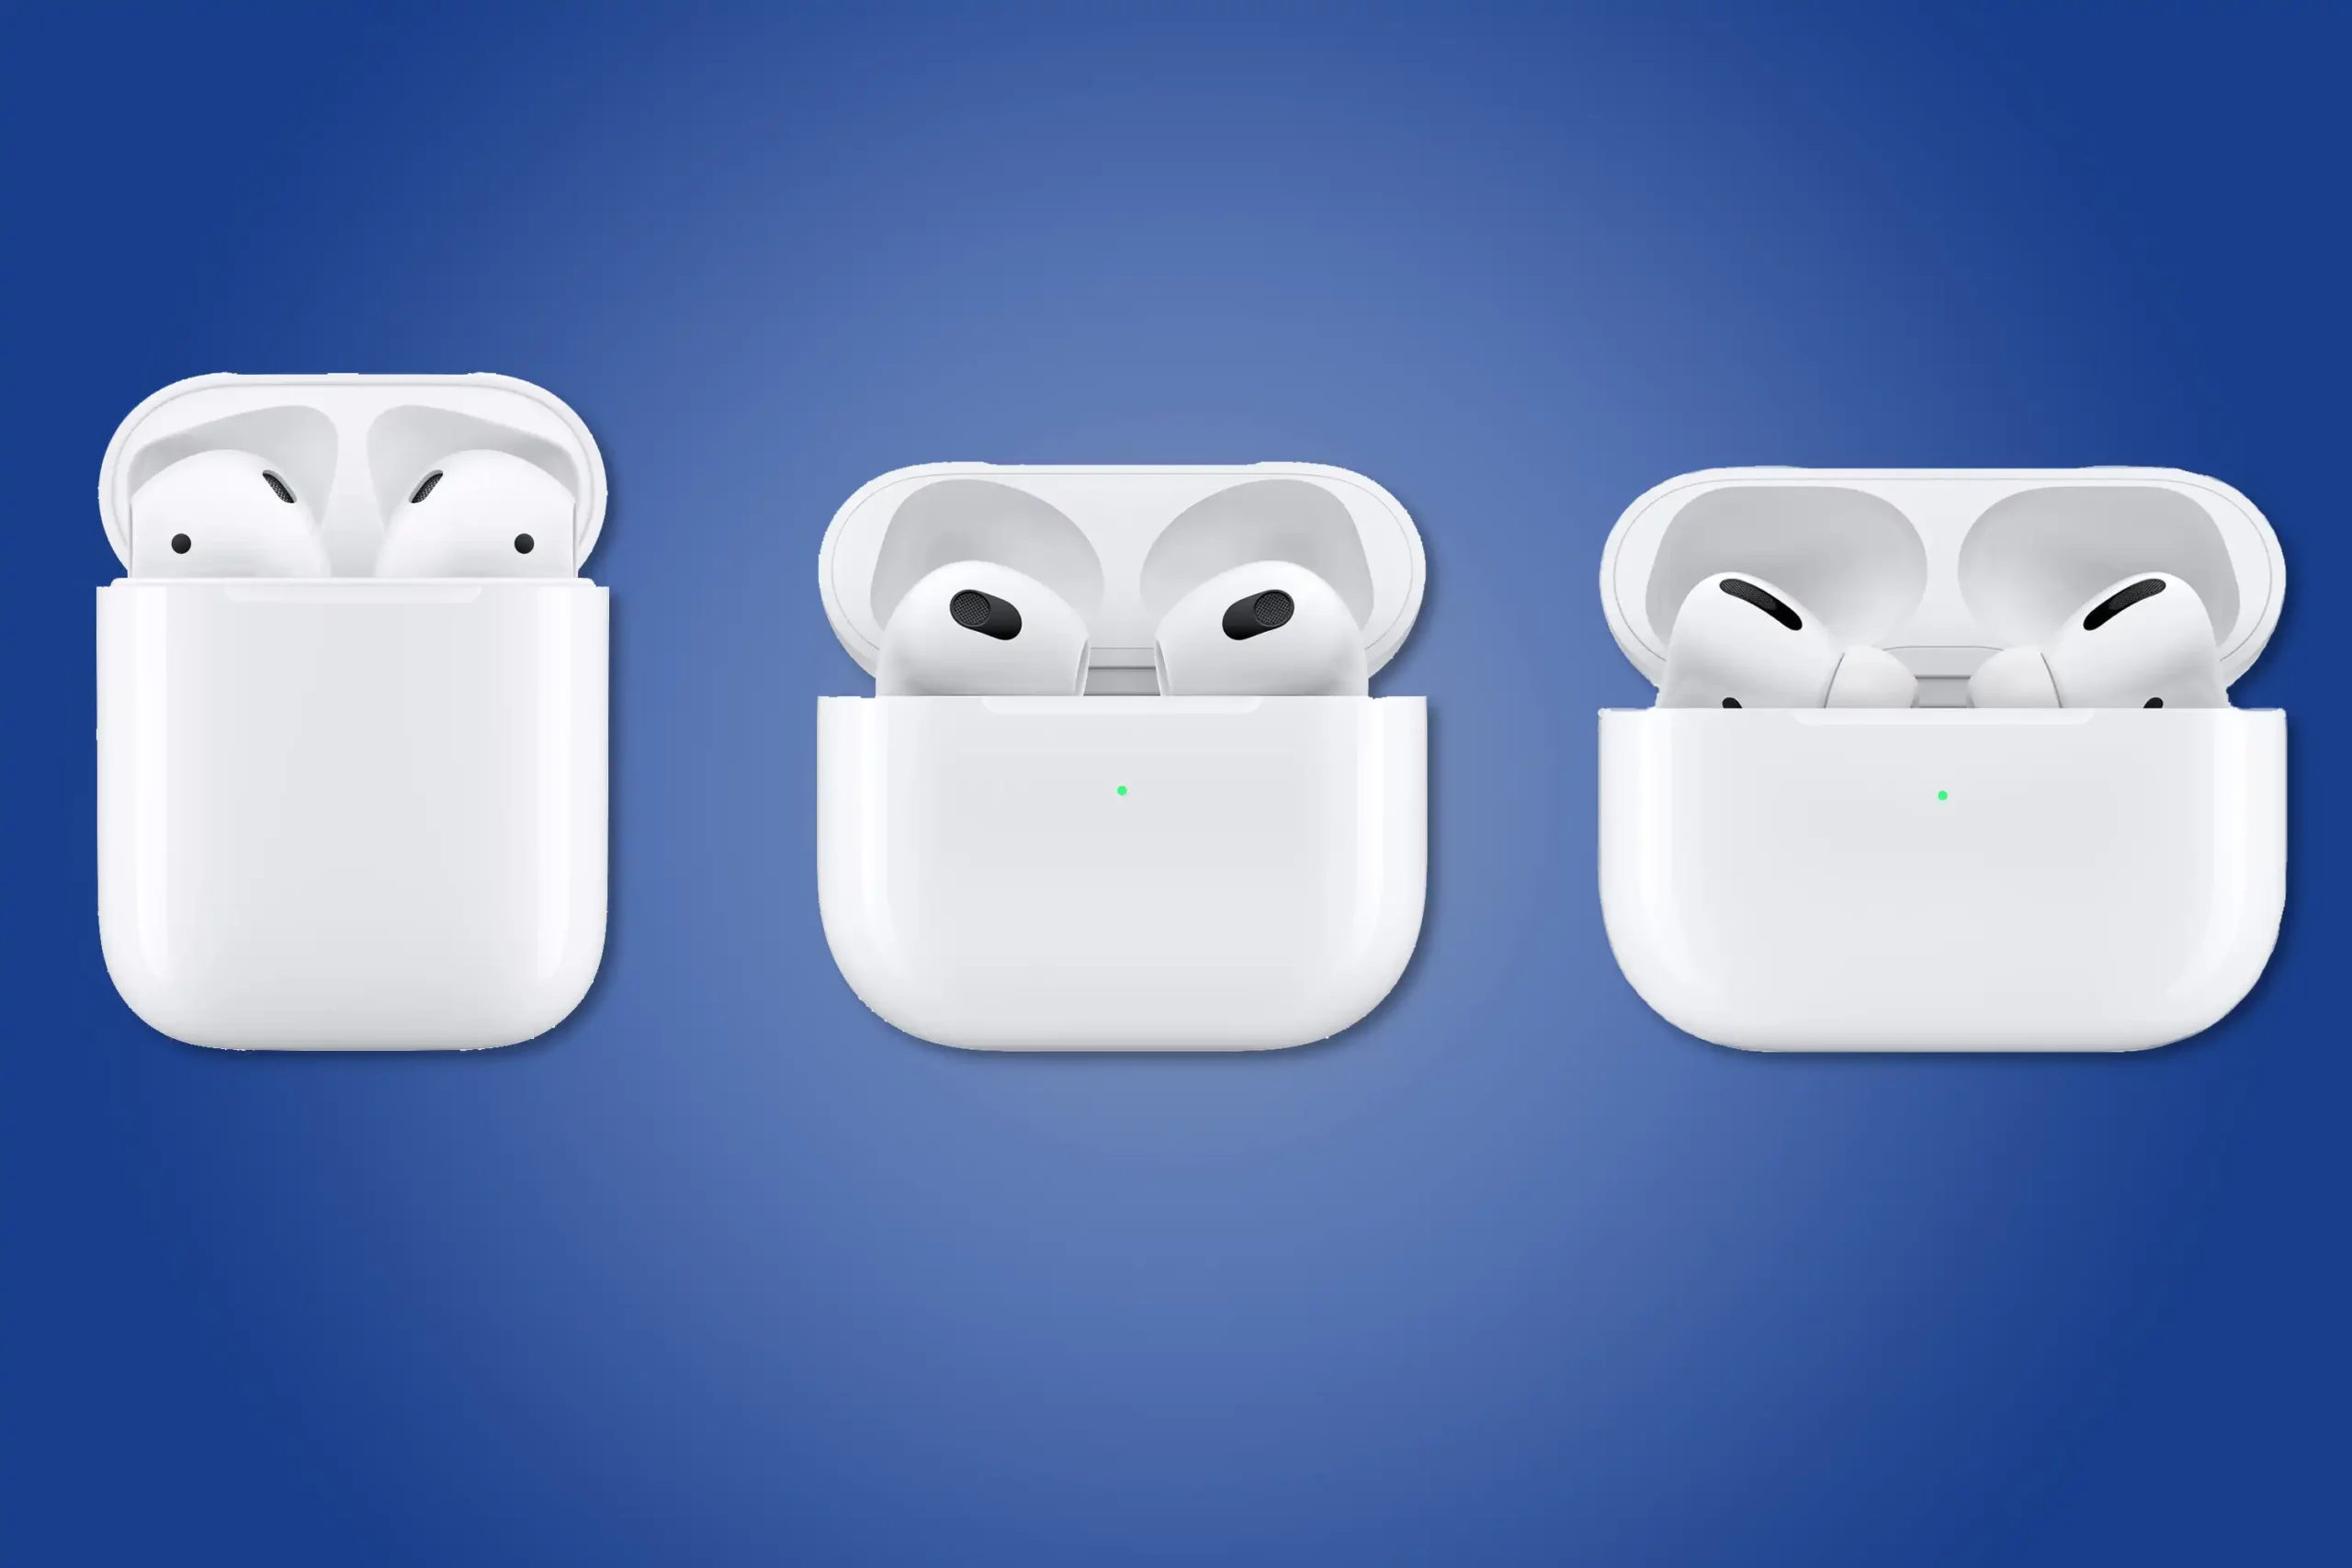 How to tell the difference between Airpods 1 and Airpods 2